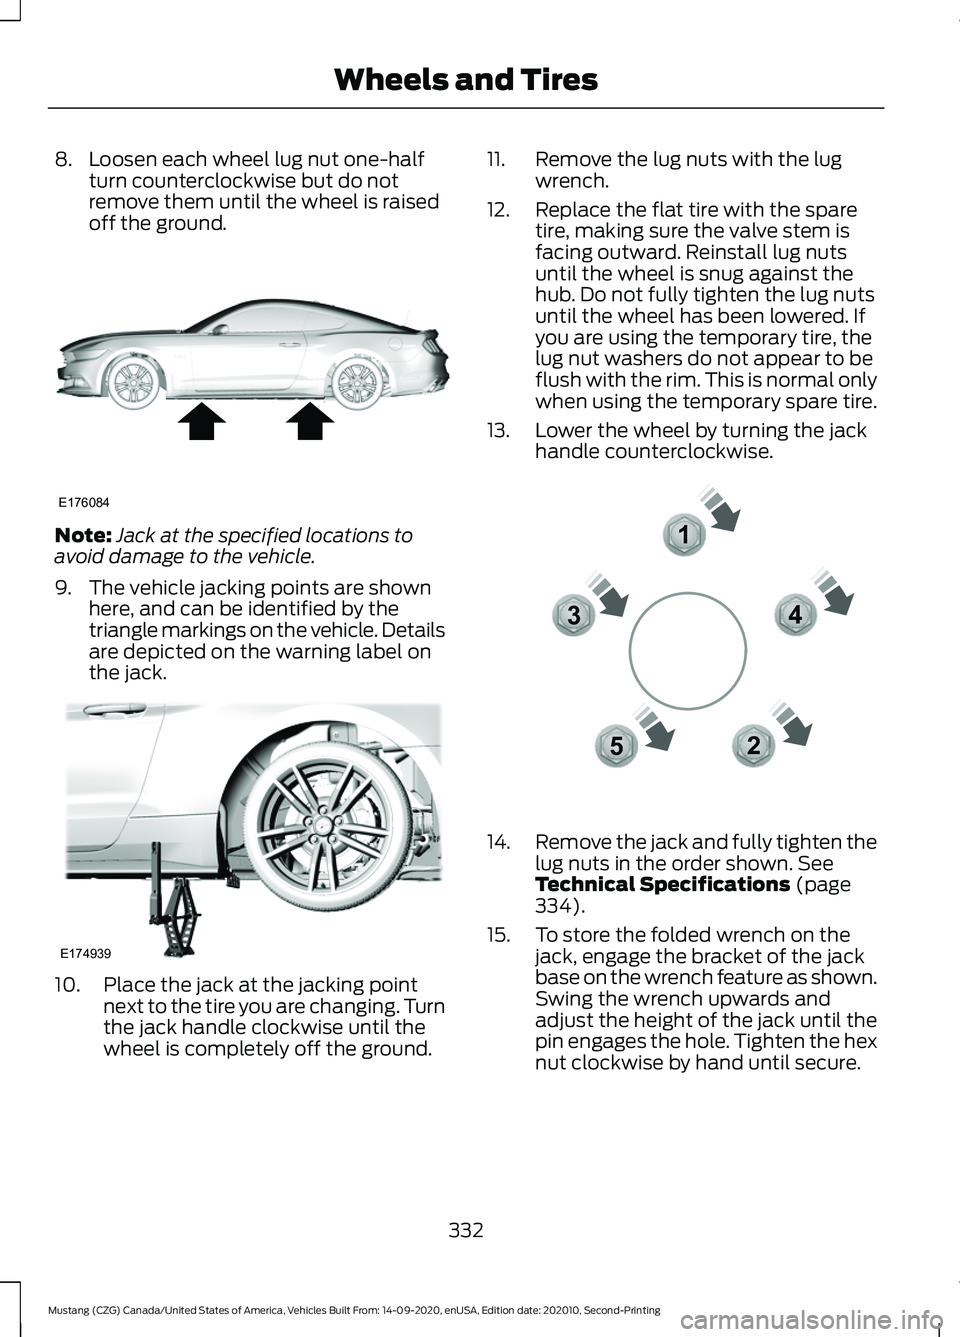 FORD MUSTANG 2021  Owners Manual 8. Loosen each wheel lug nut one-half
turn counterclockwise but do not
remove them until the wheel is raised
off the ground. Note:
Jack at the specified locations to
avoid damage to the vehicle.
9. Th